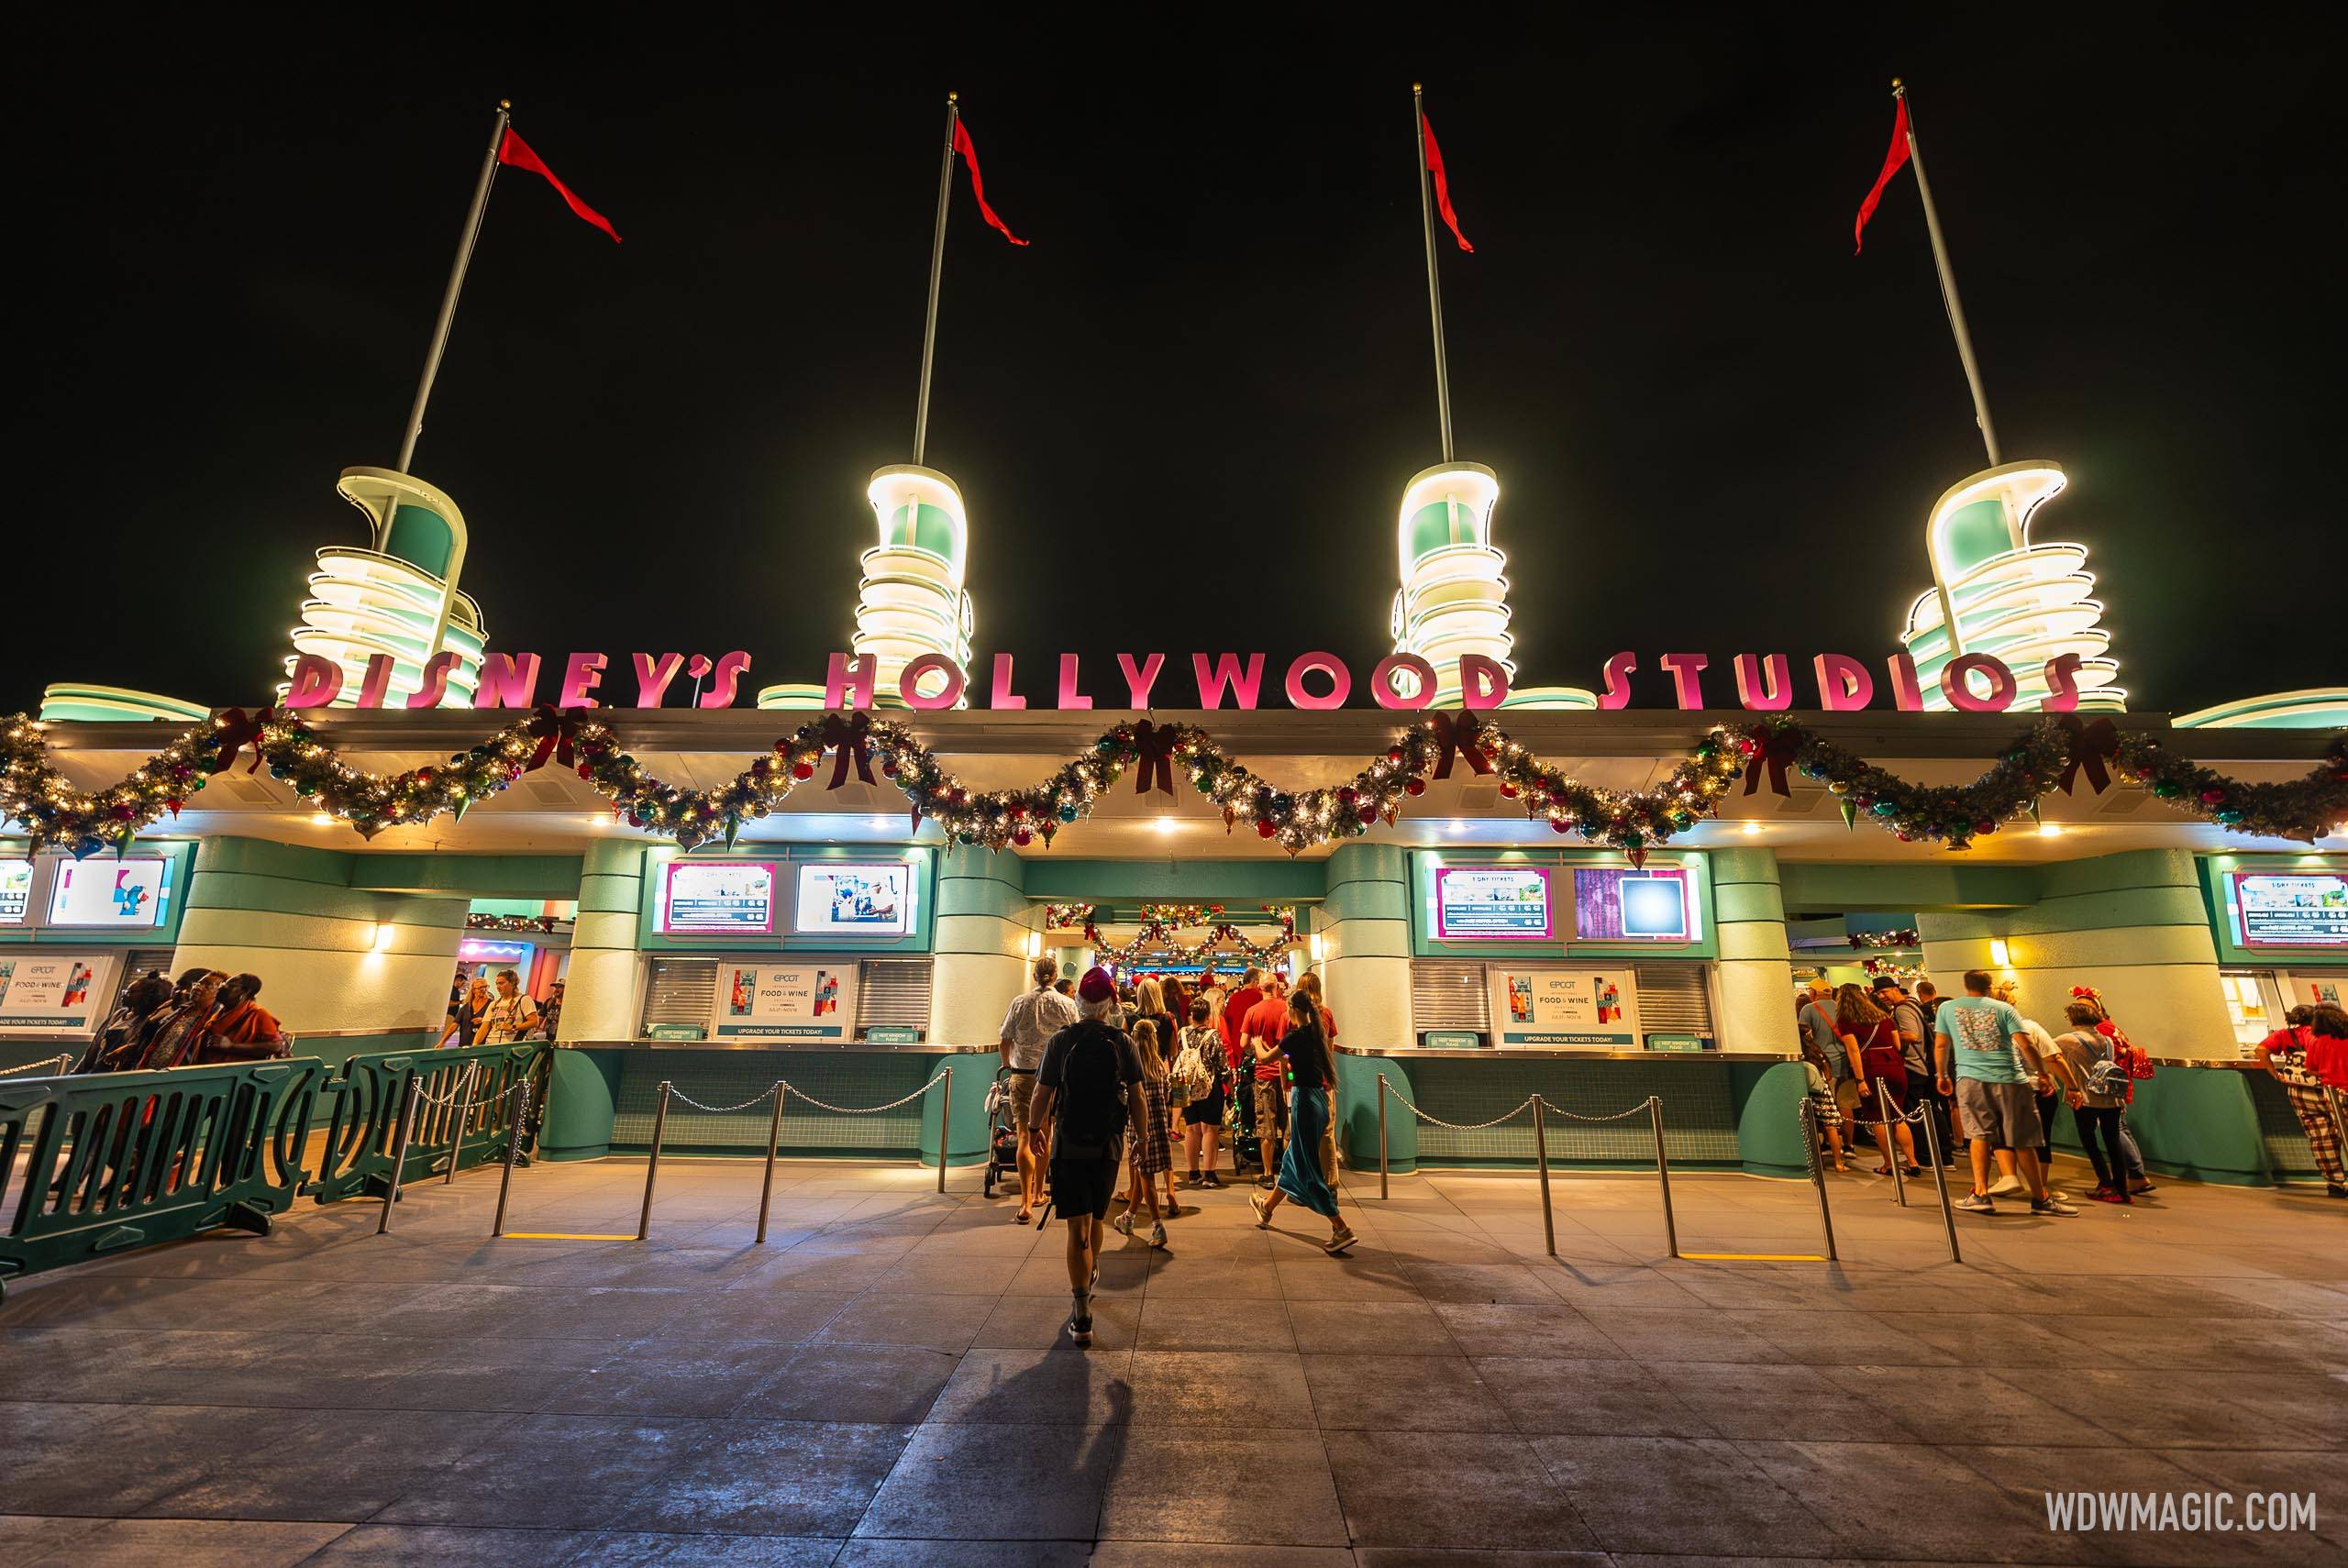 Changes made to Disney Jollywood Nights aim to fix the problems from opening  night